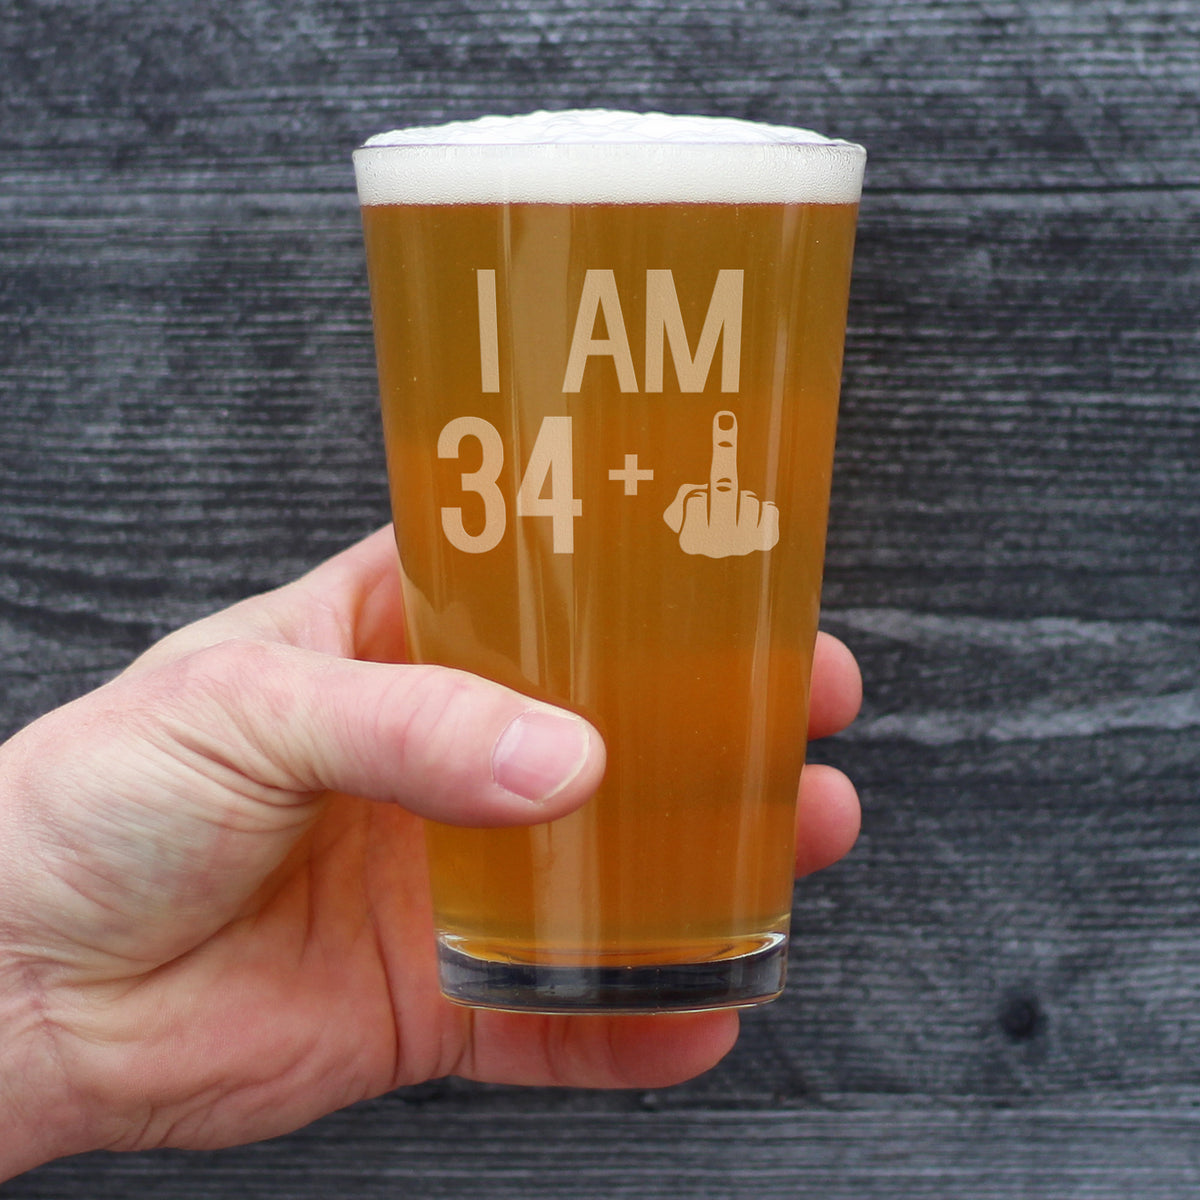 34 + 1 Middle Finger - 16 oz Pint Glass for Beer - Funny 35th Birthday Gifts for Men and Women Turning 35